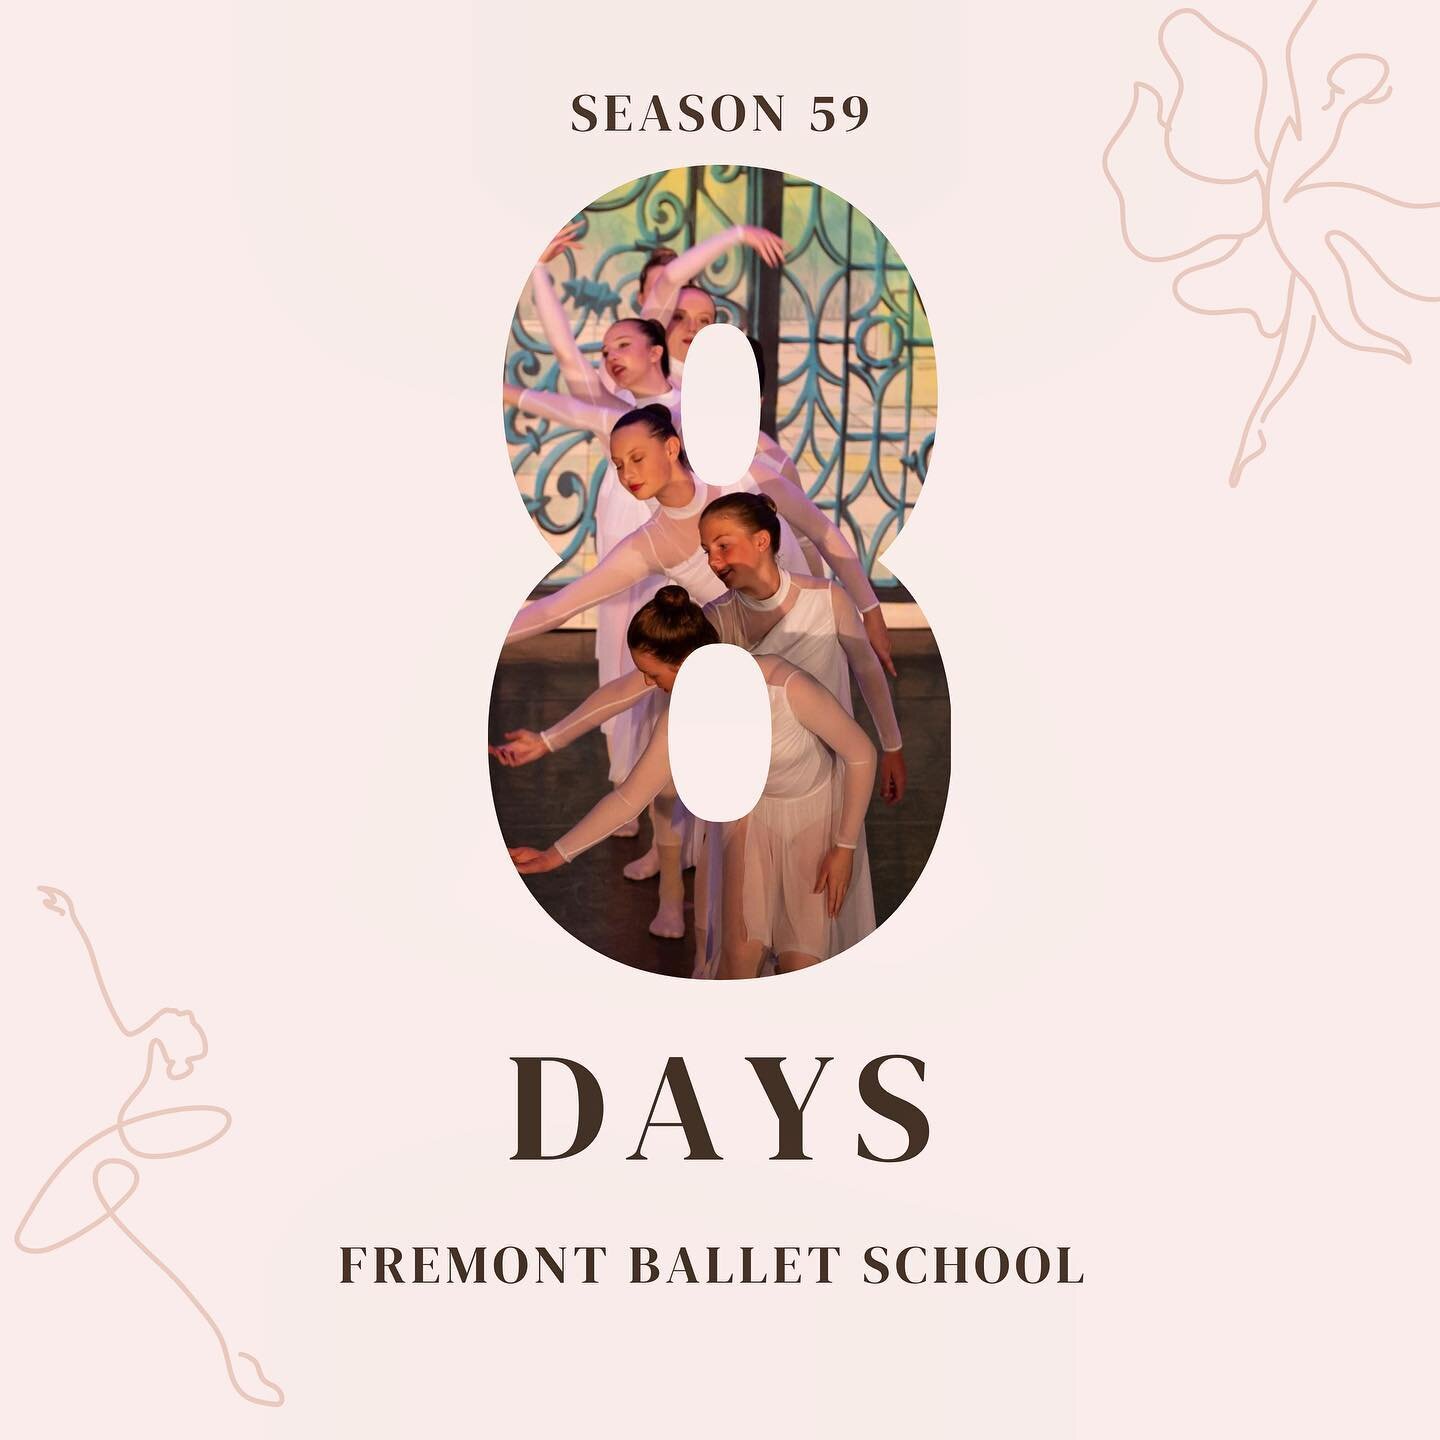 ✨ Just 8️⃣ days left until we are together dancing again! Comment below one of your favorite memories from the 2021-22 season. One of my favorite parts of last season was seeing how quickly and willingly our dancers adapted their choreography to smal